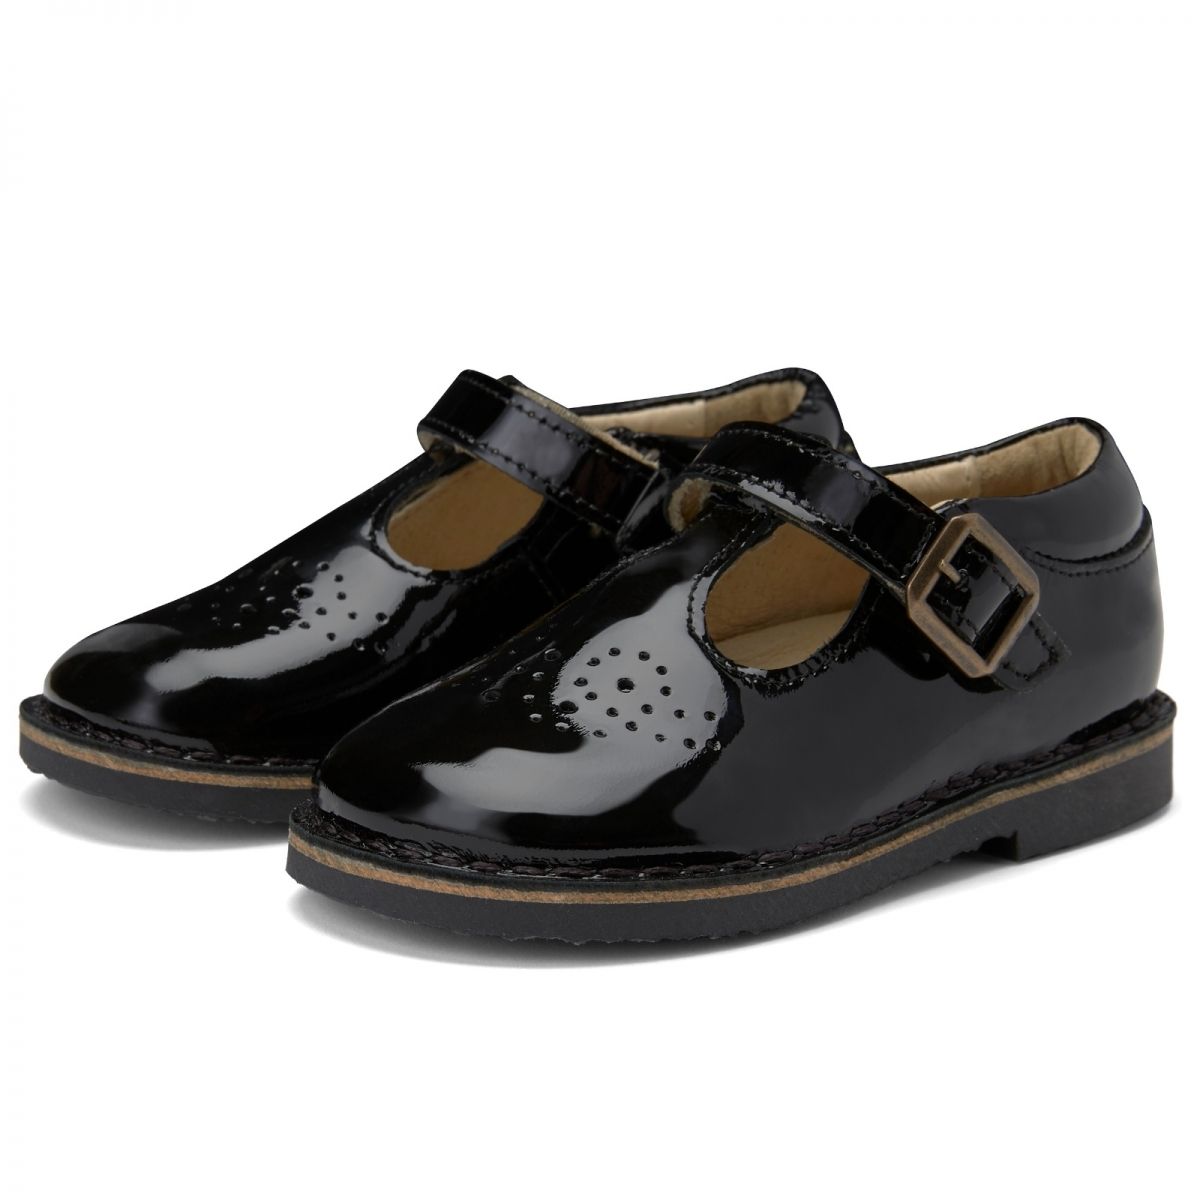 Young Soles T-bar Shoe Penny Patent Leather black